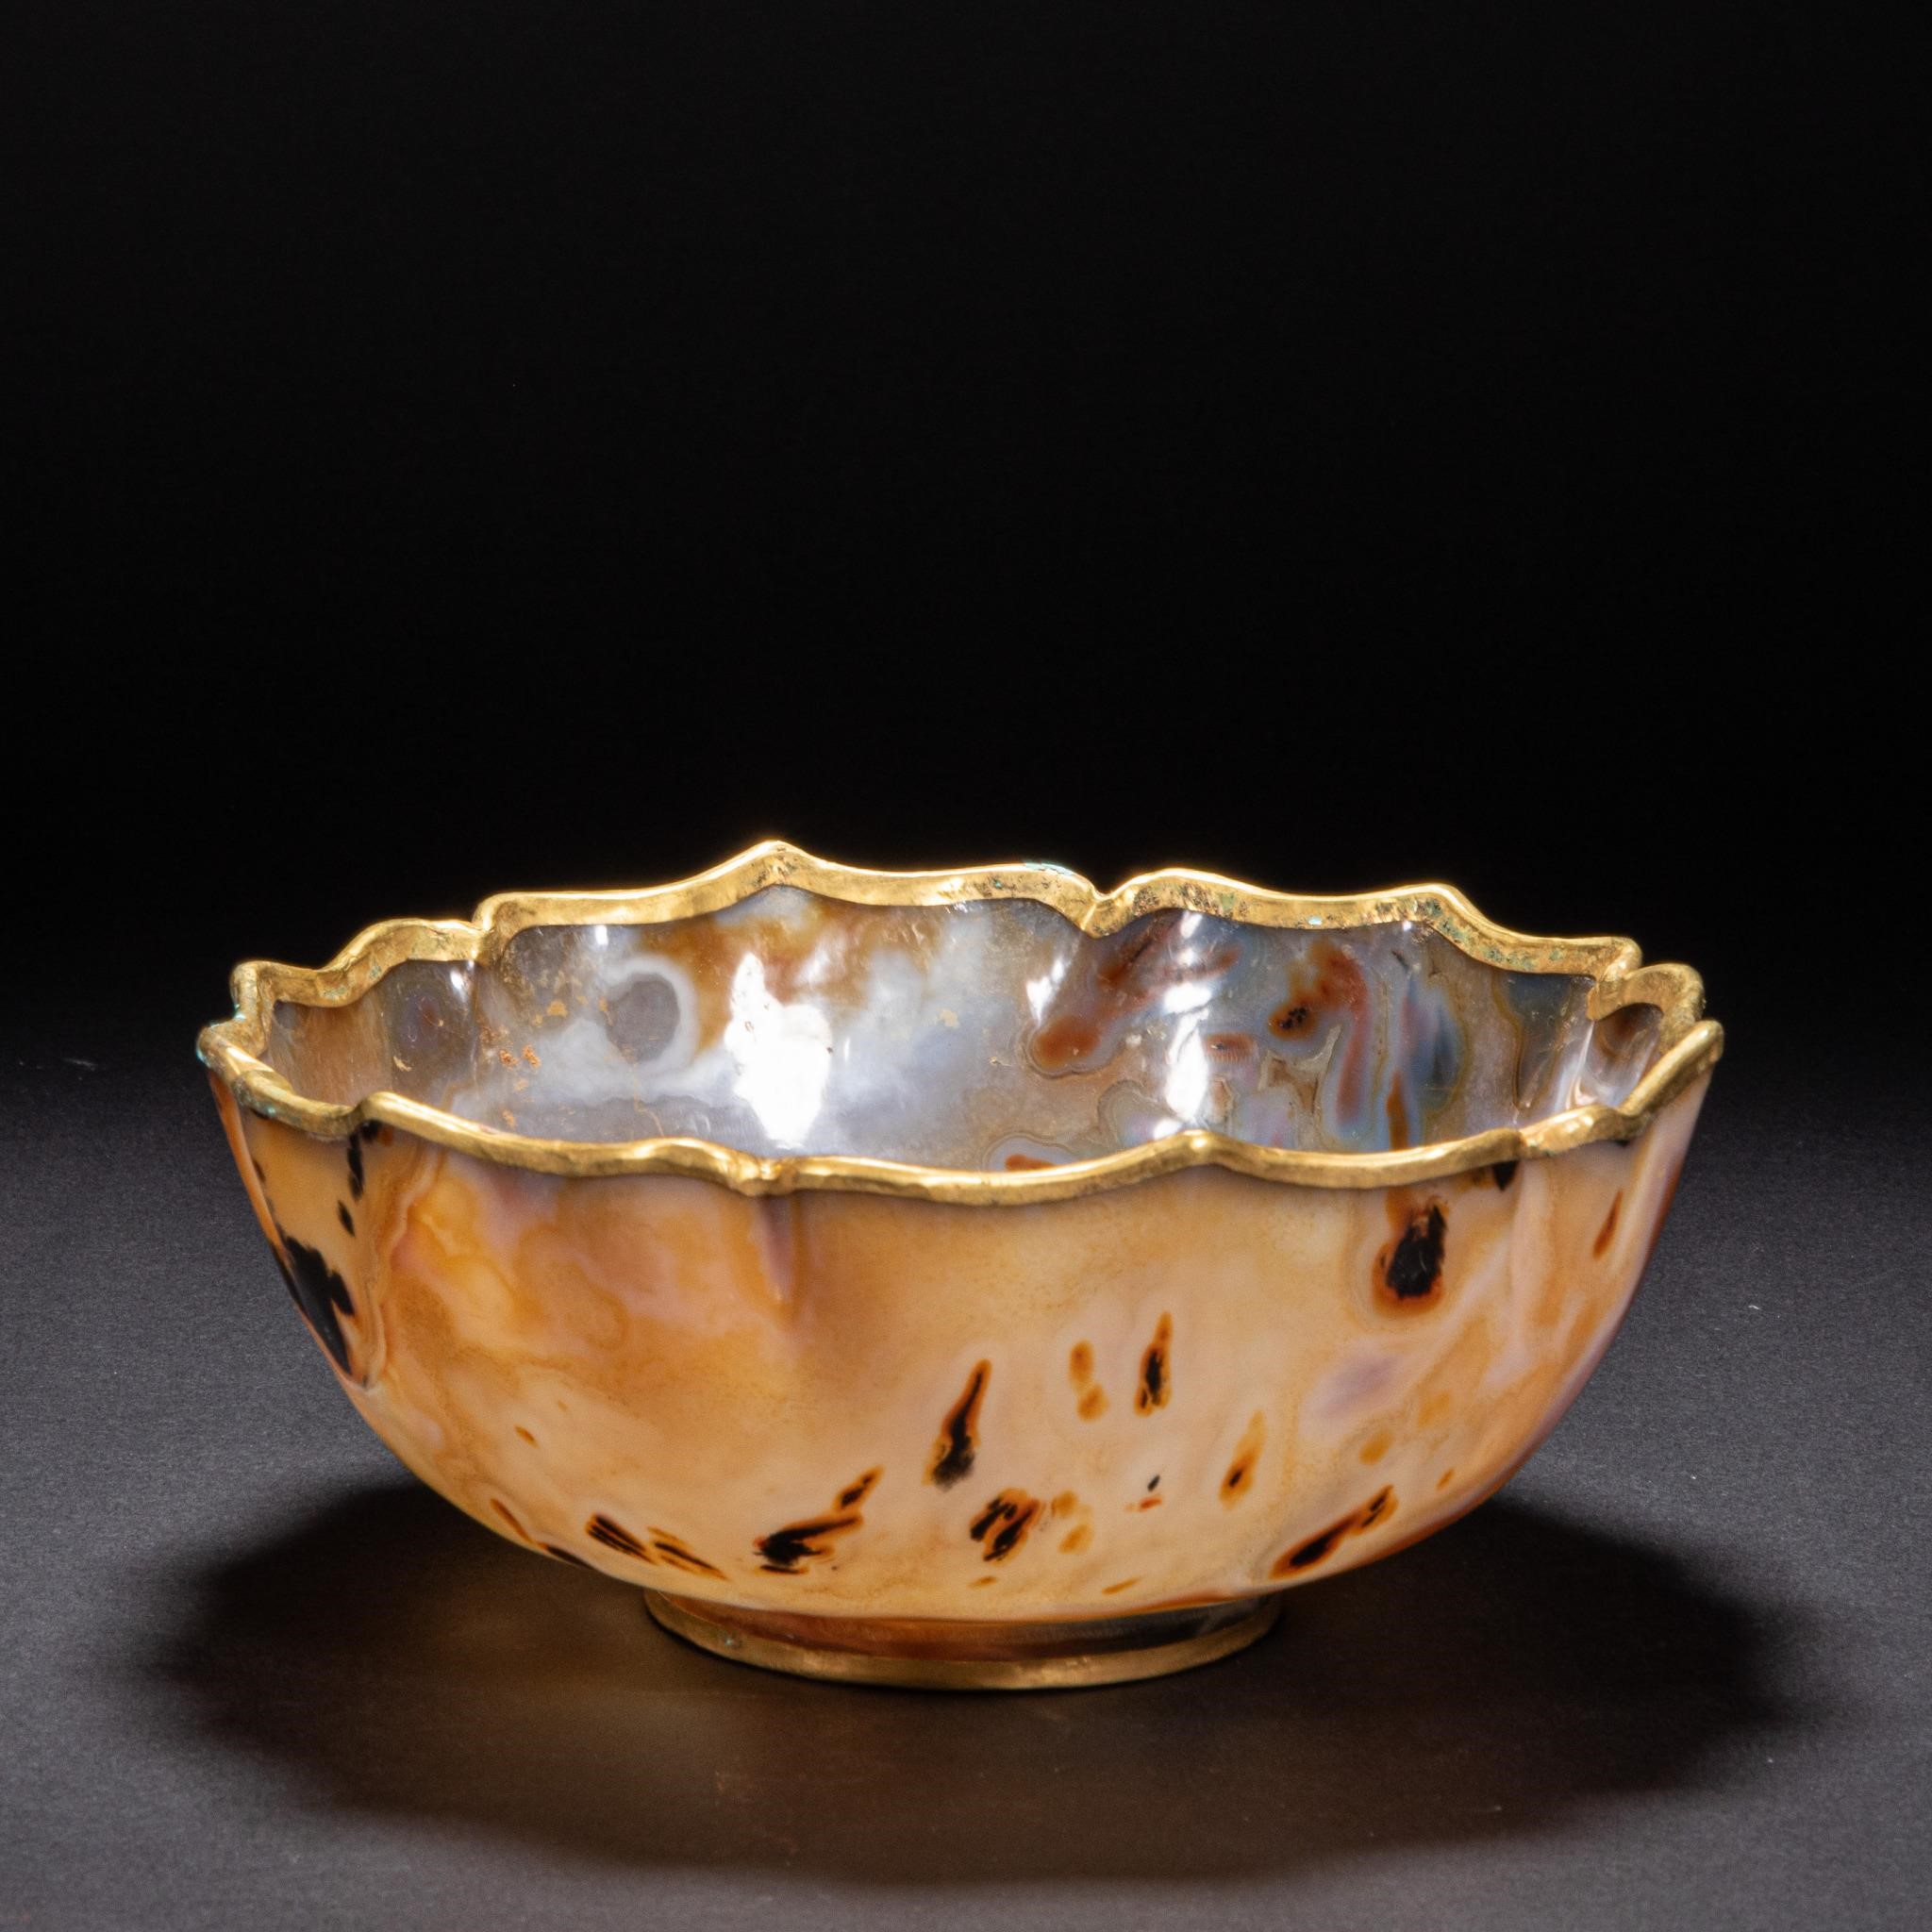 Previously, agate bowls